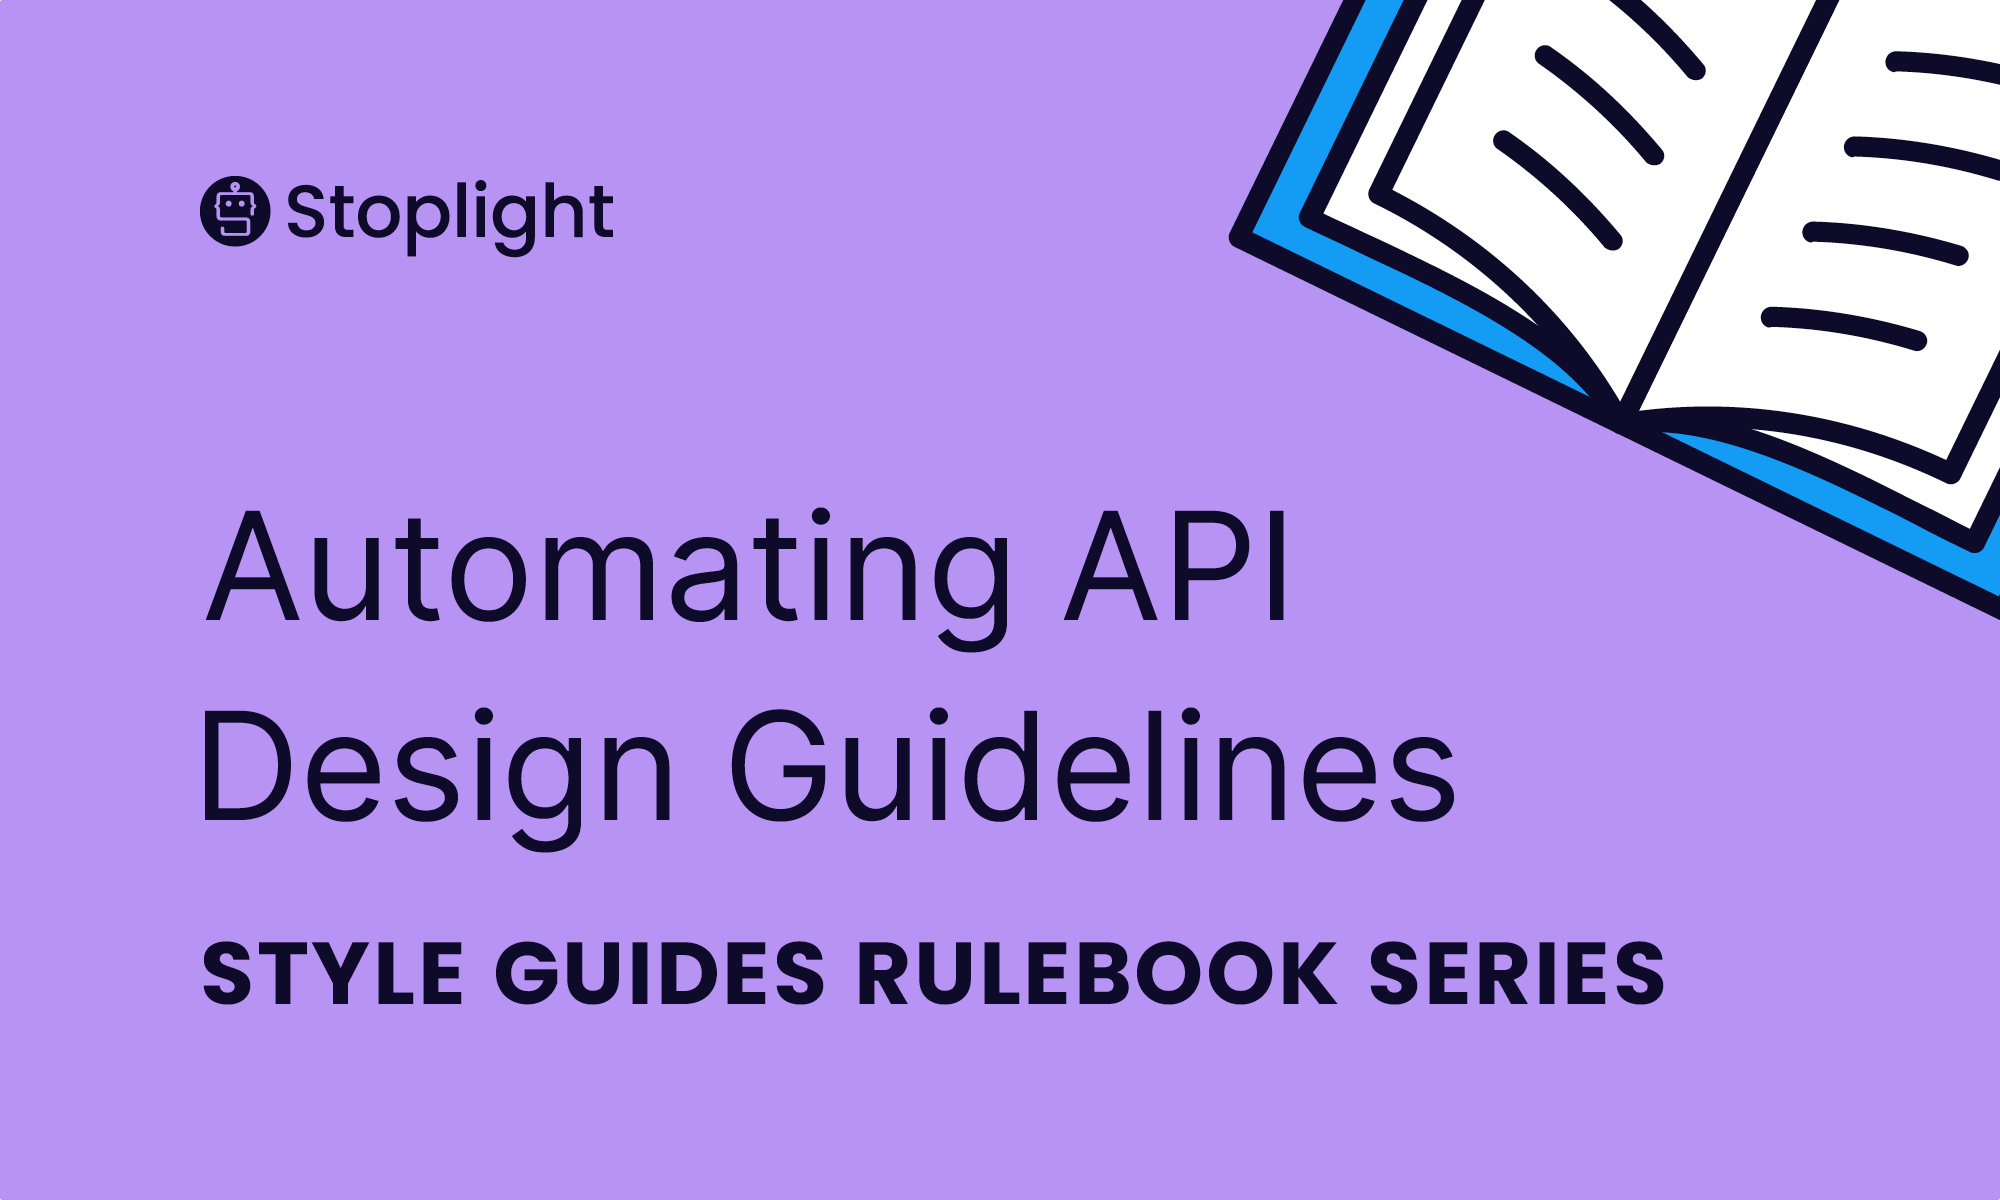 Style Guides Rulebook Series: Automating API Design Guidelines